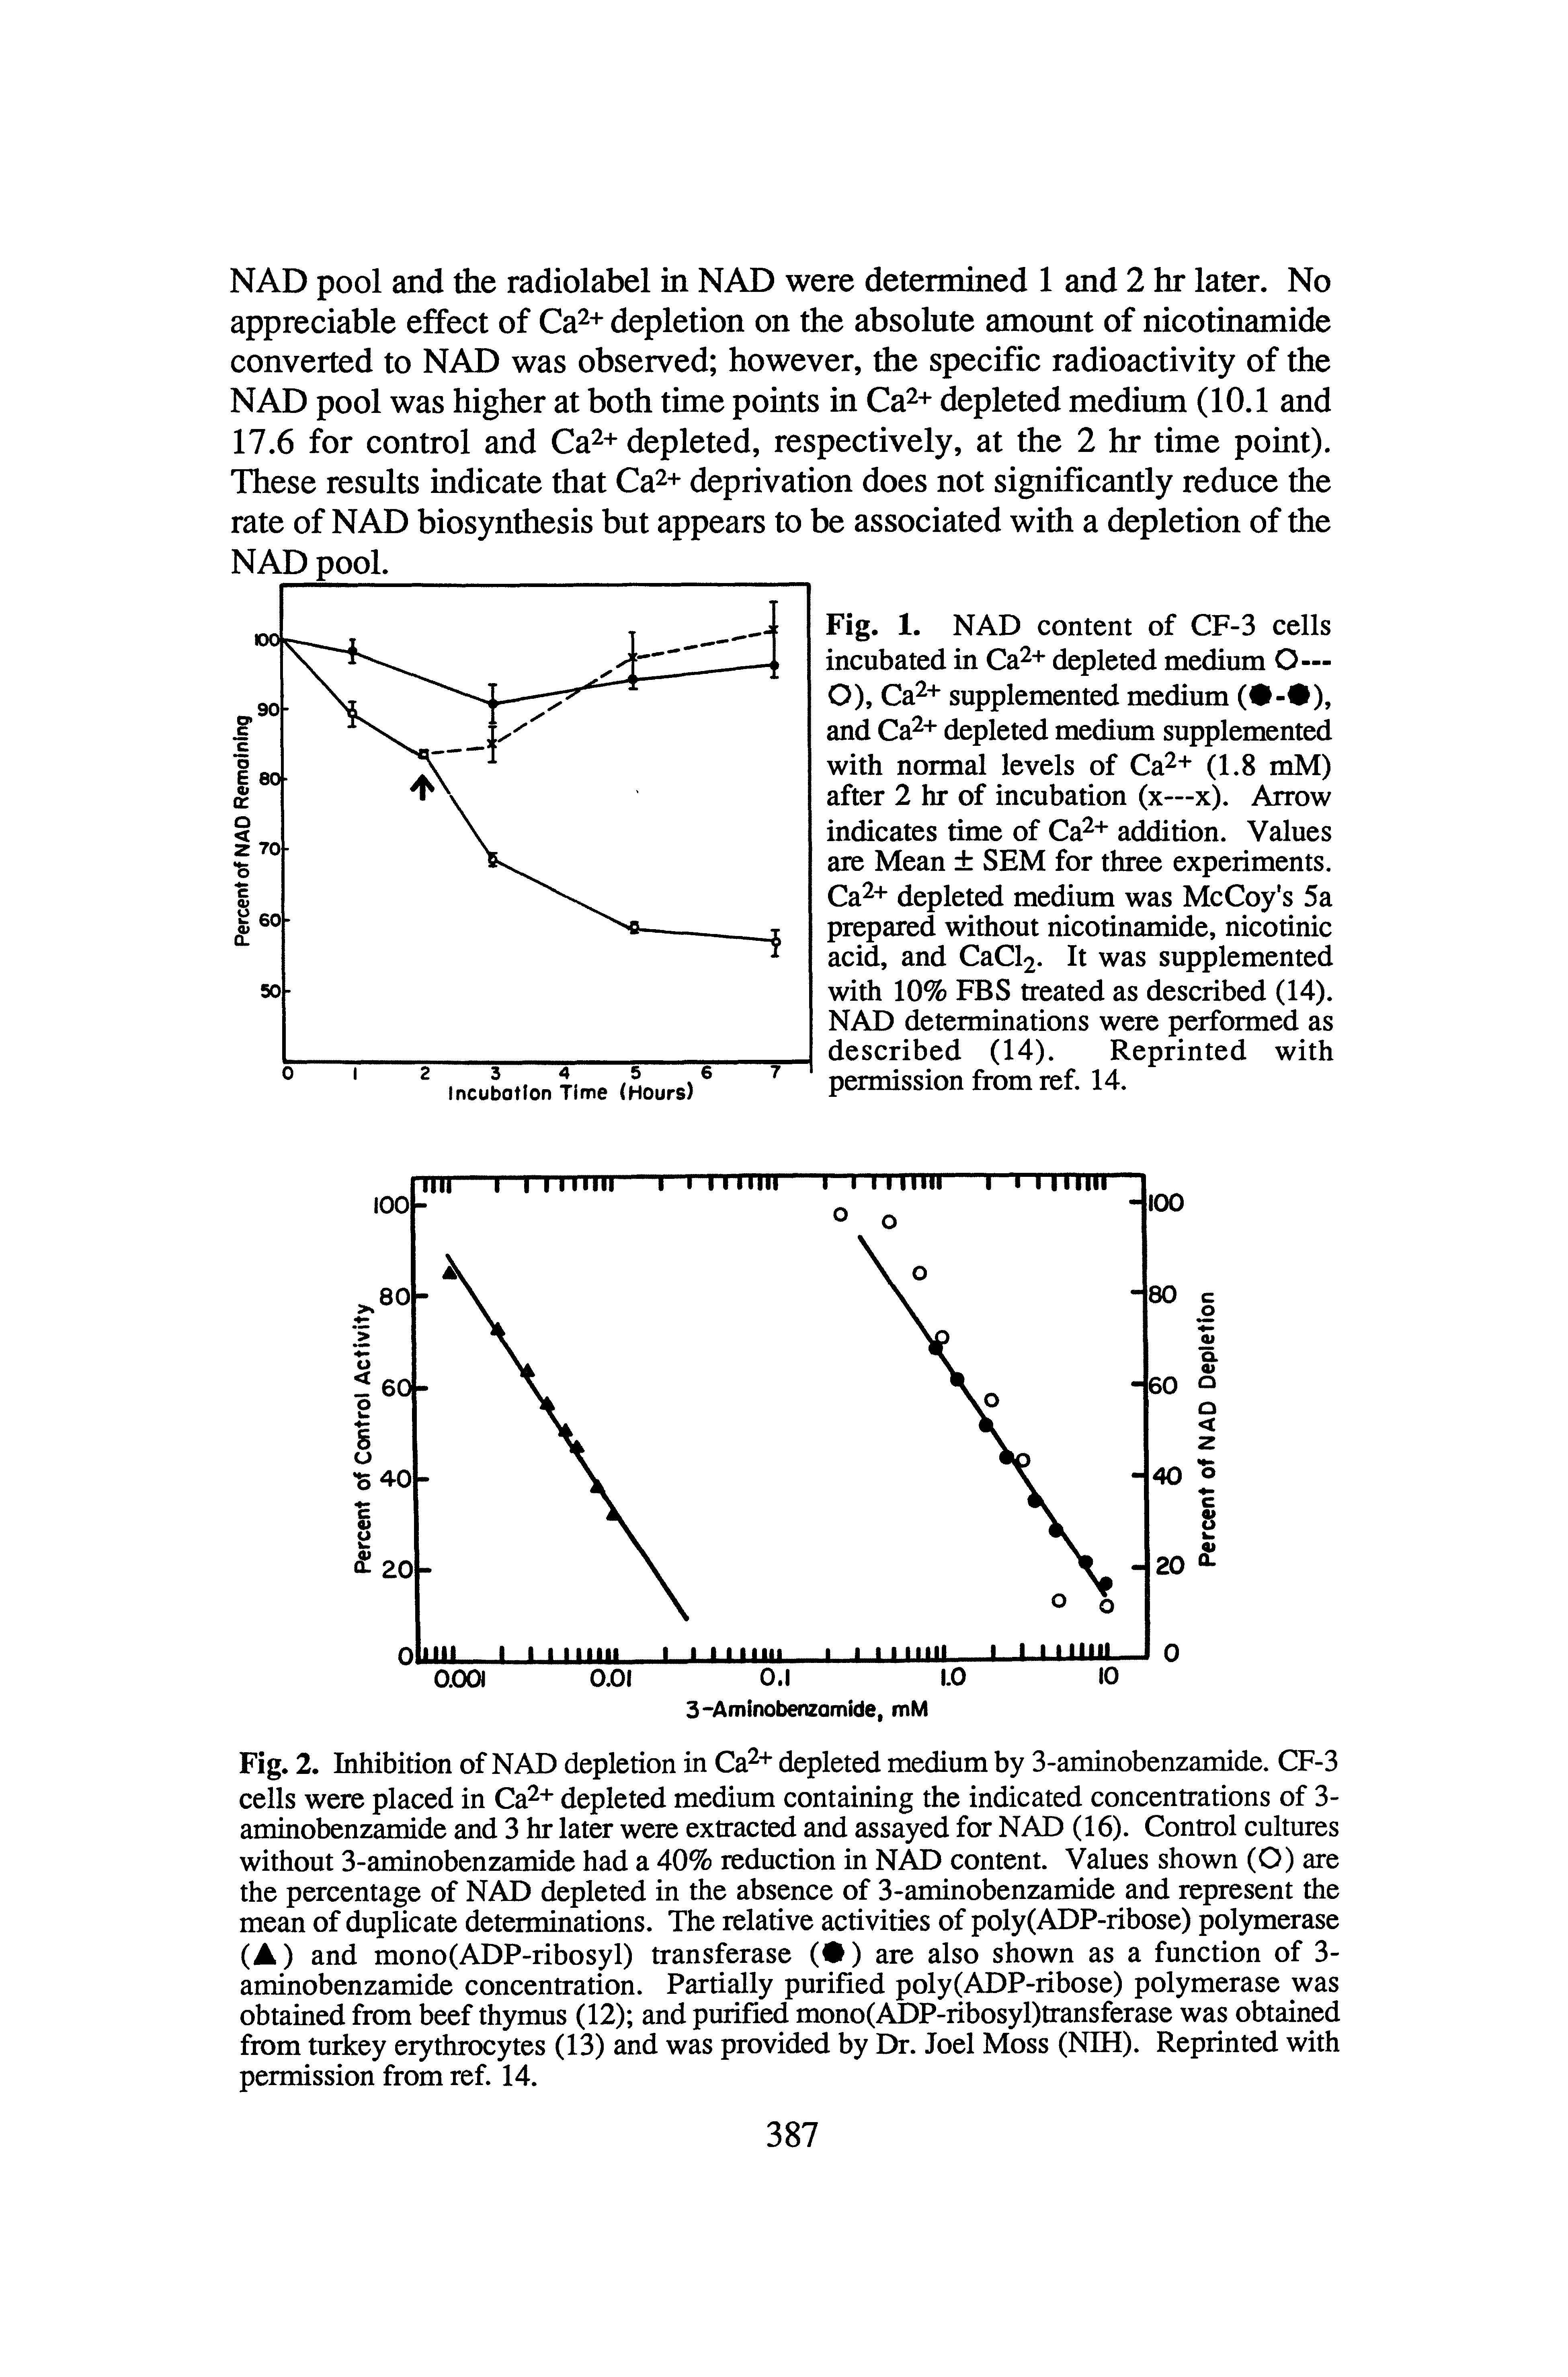 Fig. 2. Inhibition of NAD depletion in Ca + depleted medium by 3-aminobenzamide. CF-3 cells were placed in Ca + depleted medium containing the indicated concentrations of 3-aminobenzamide and 3 hr later were extracted and assayed for NAD (16). Control cultures without 3-aminobenzamide had a 40% reduction in NAD content. Values shown (O) are the percentage of NAD depleted in the absence of 3-aminobenzamide and represent the mean of duplicate determinations. The relative activities of poly(ADP-ribose) polymerase (A) and mono(ADP-ribosyl) transferase ( ) are also shown as a function of 3-aminobenzamide concentration. Partially purified poly(ADP-ribose) polymerase was obtained from beef thymus (12) and purified mono(ADP-ribosyl)transferase was obtained from turkey erythrocytes (13) and was provided by Dr. Joel Moss (NIH). Reprinted with permission from ref. 14.